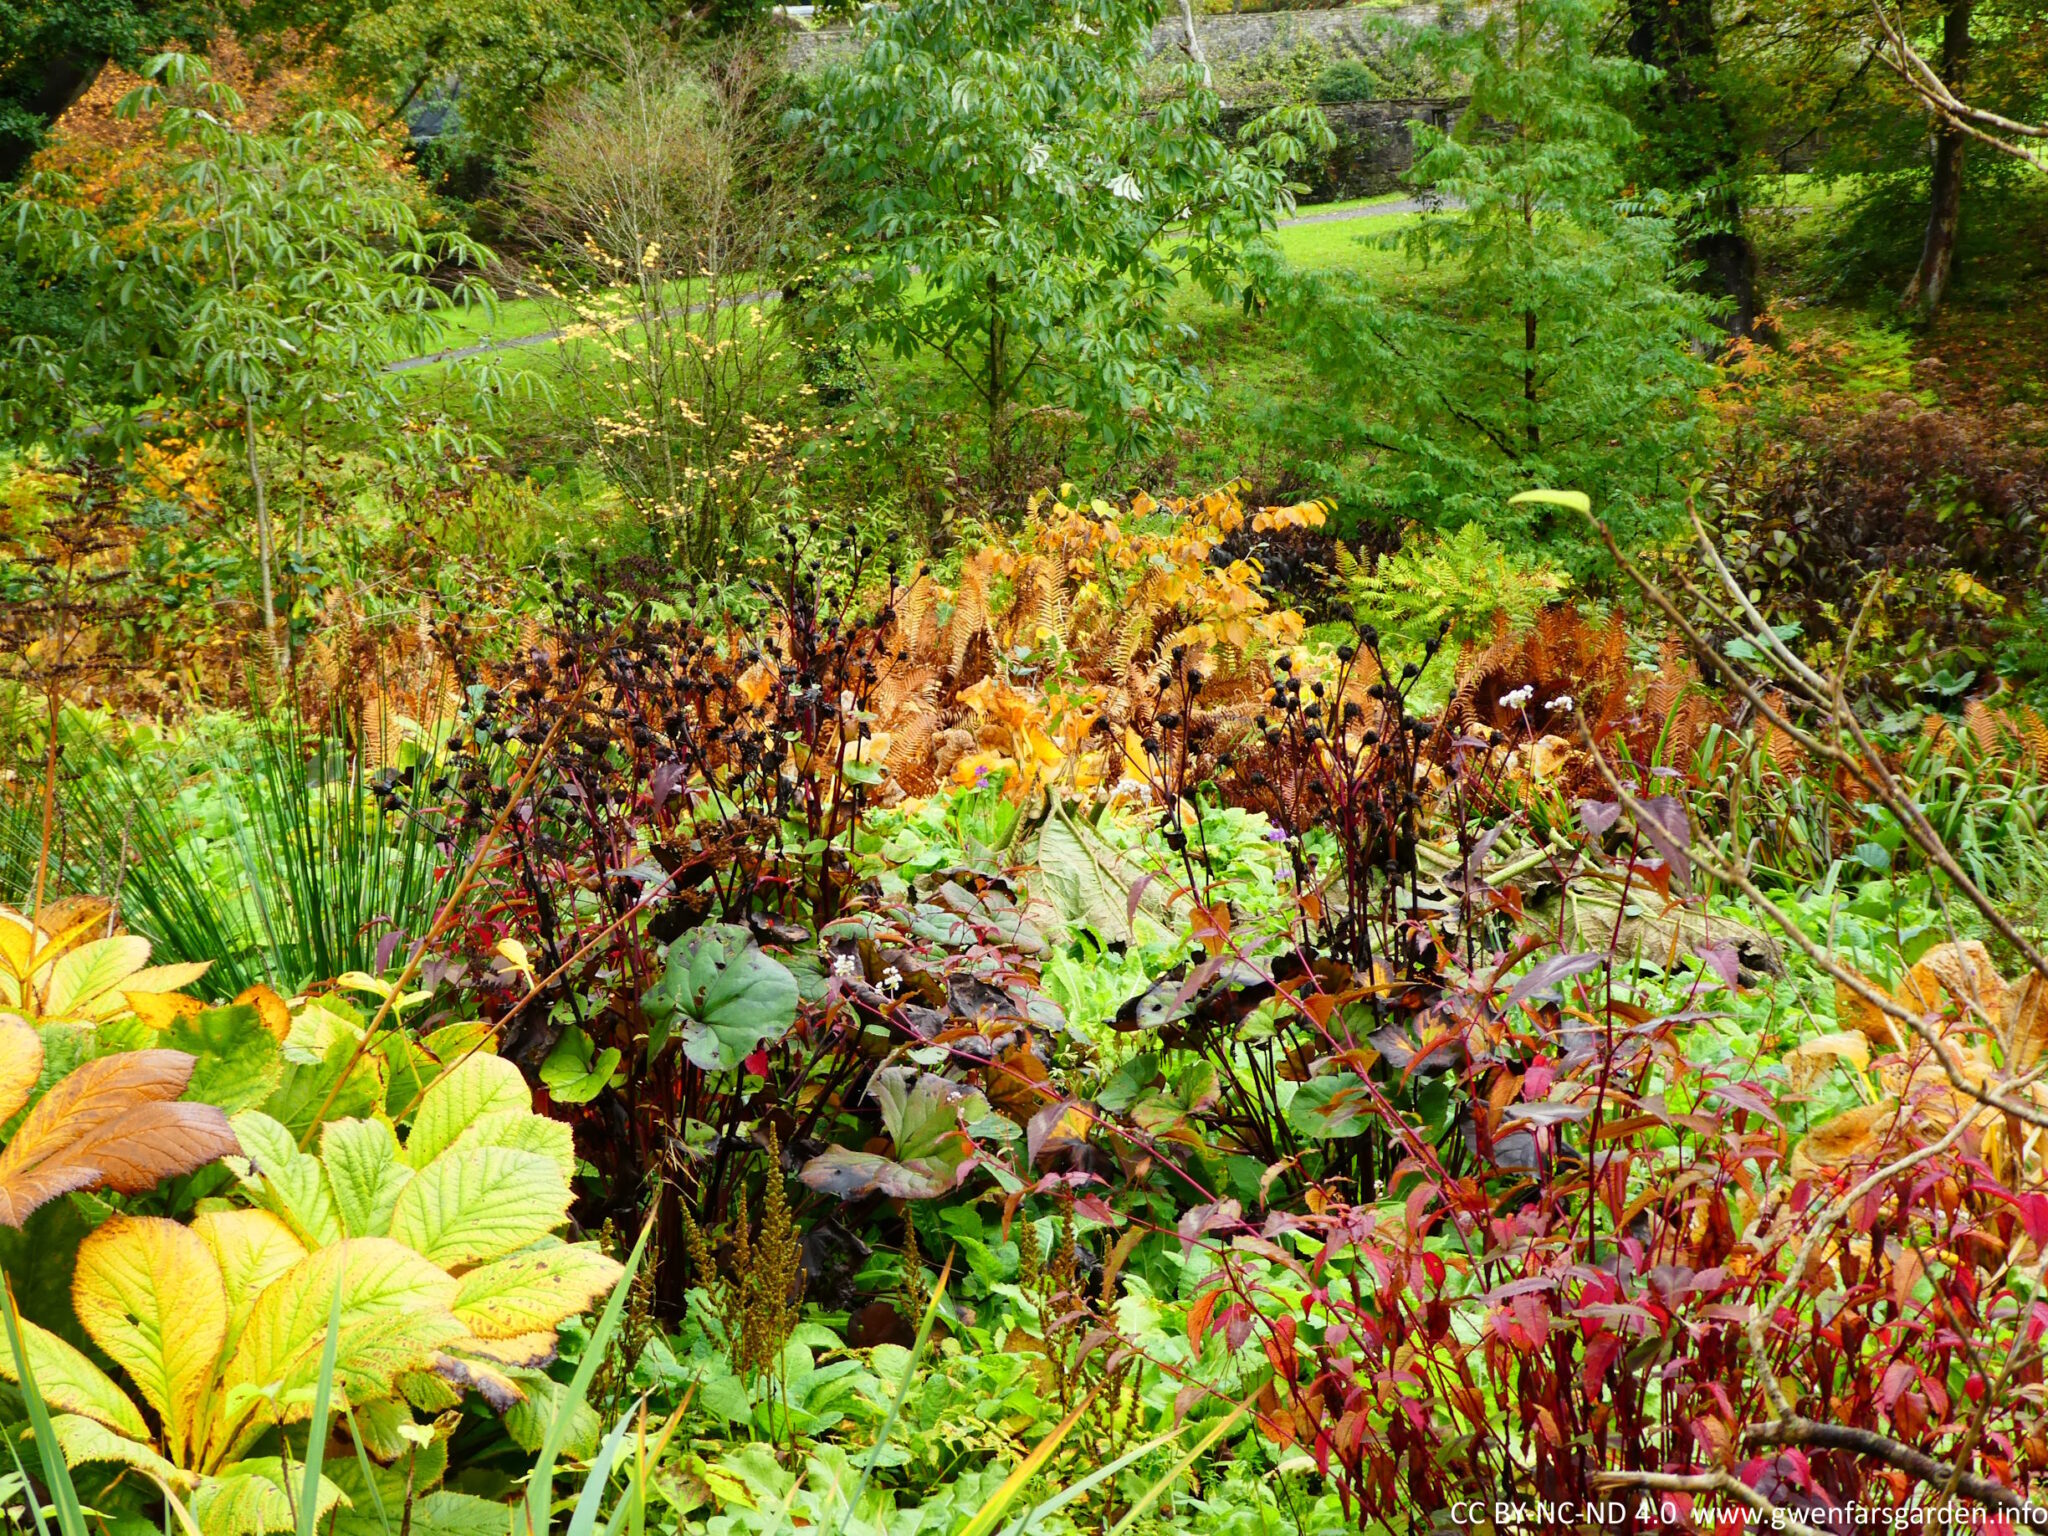 A large plant border filled with different plants in different stages of dying back for winter. It mostly in shades of green and orange, and with some black flower stems.